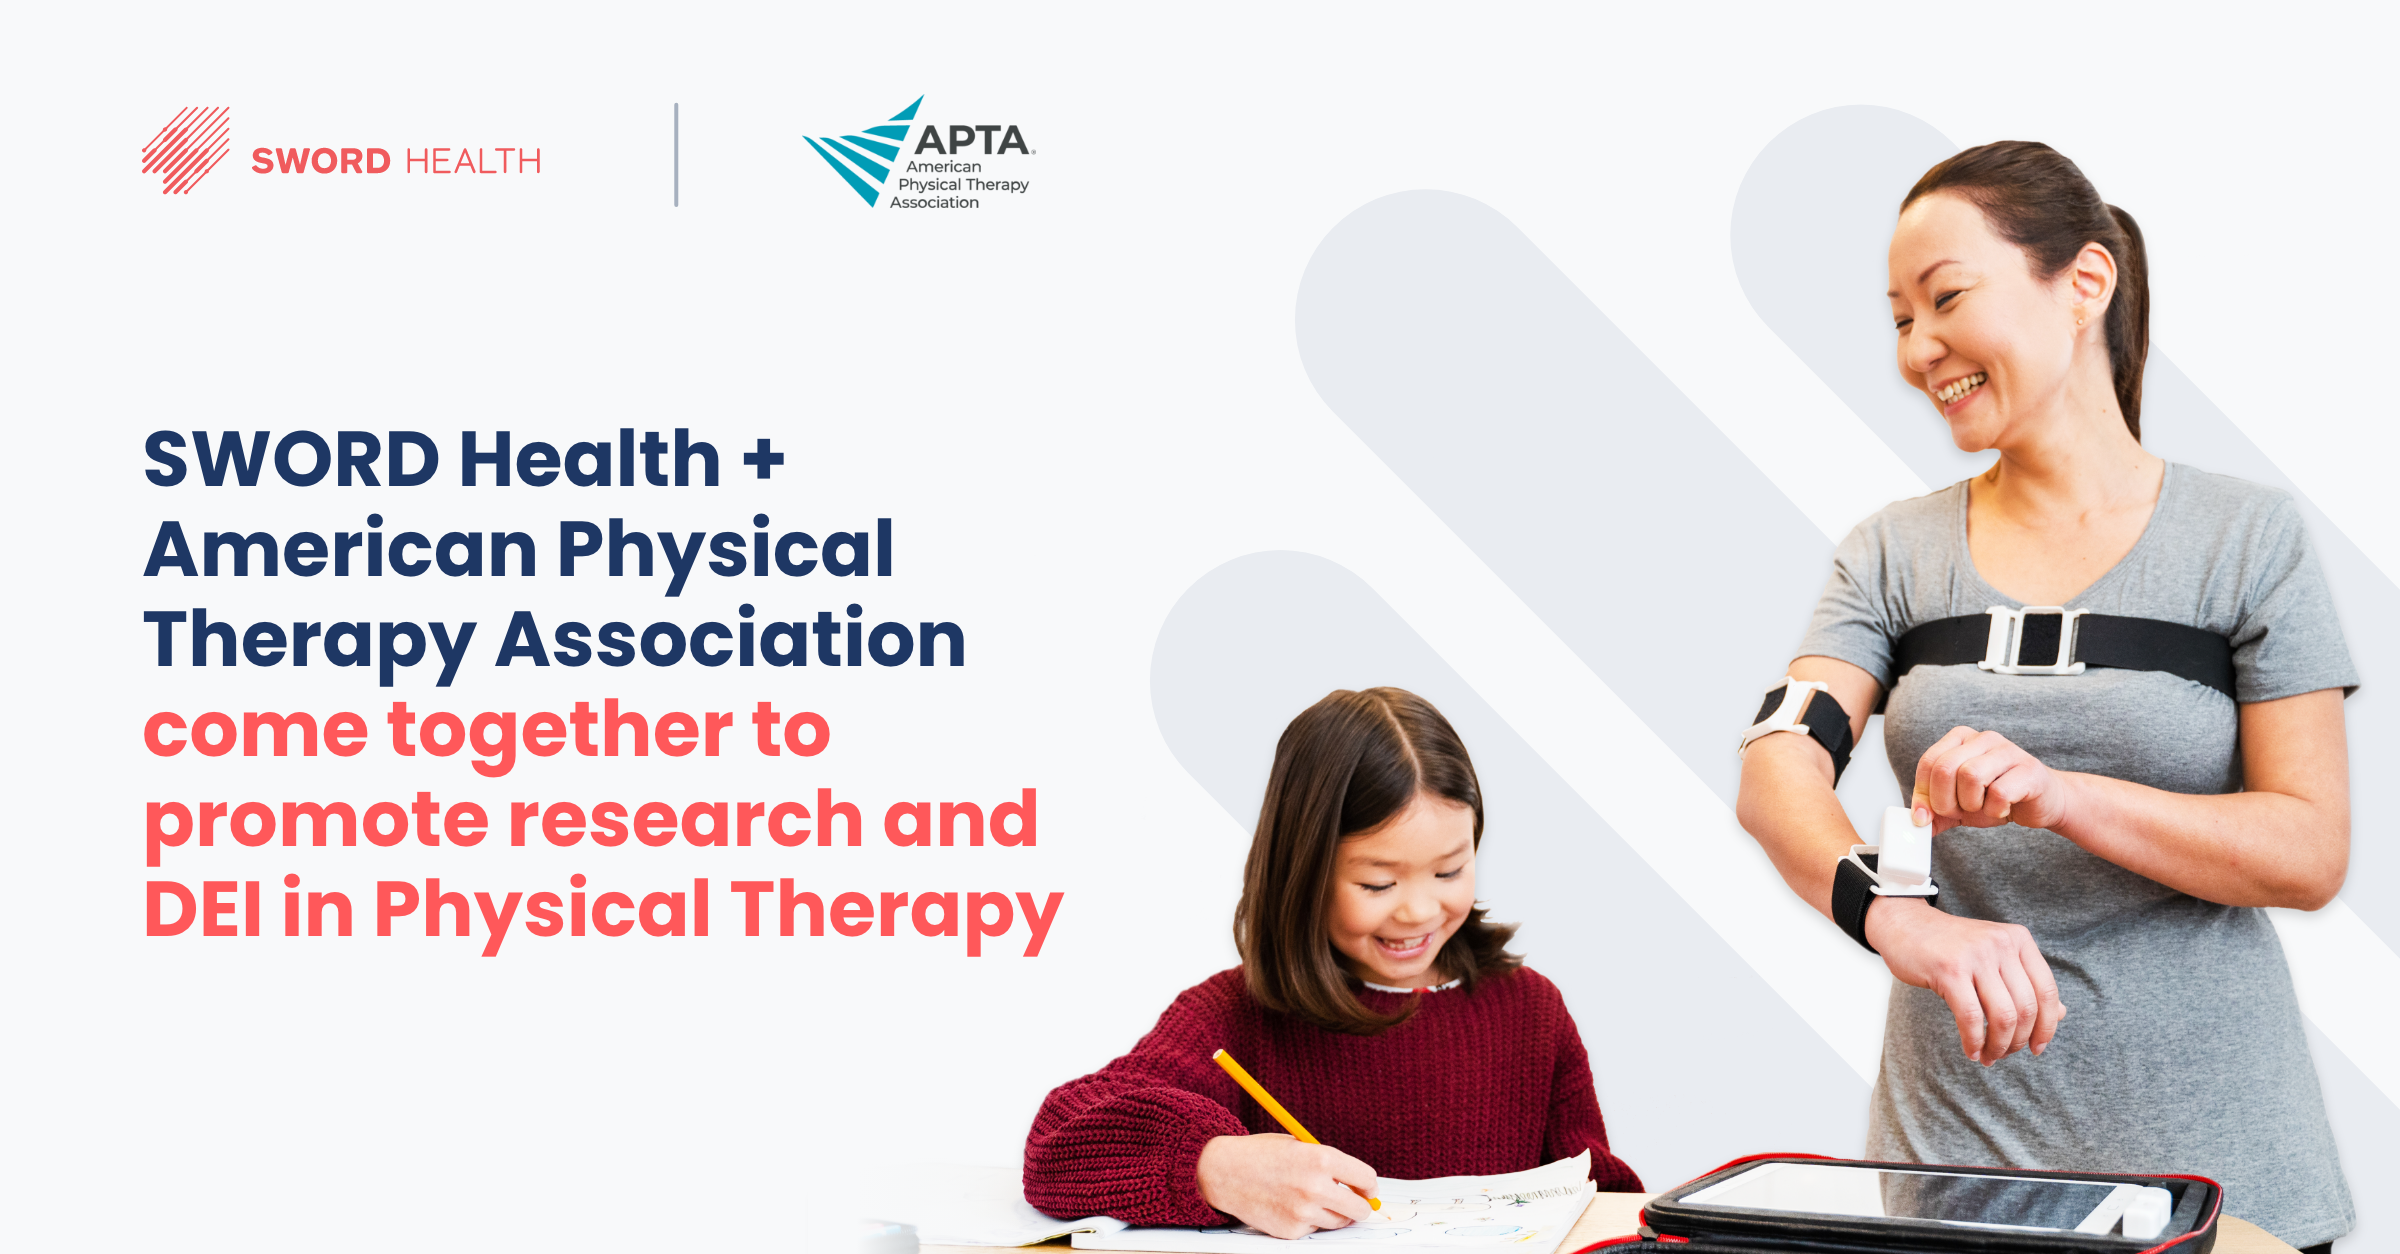 Sword Health joins with American Physical Therapy Association to promote research in physical therapy